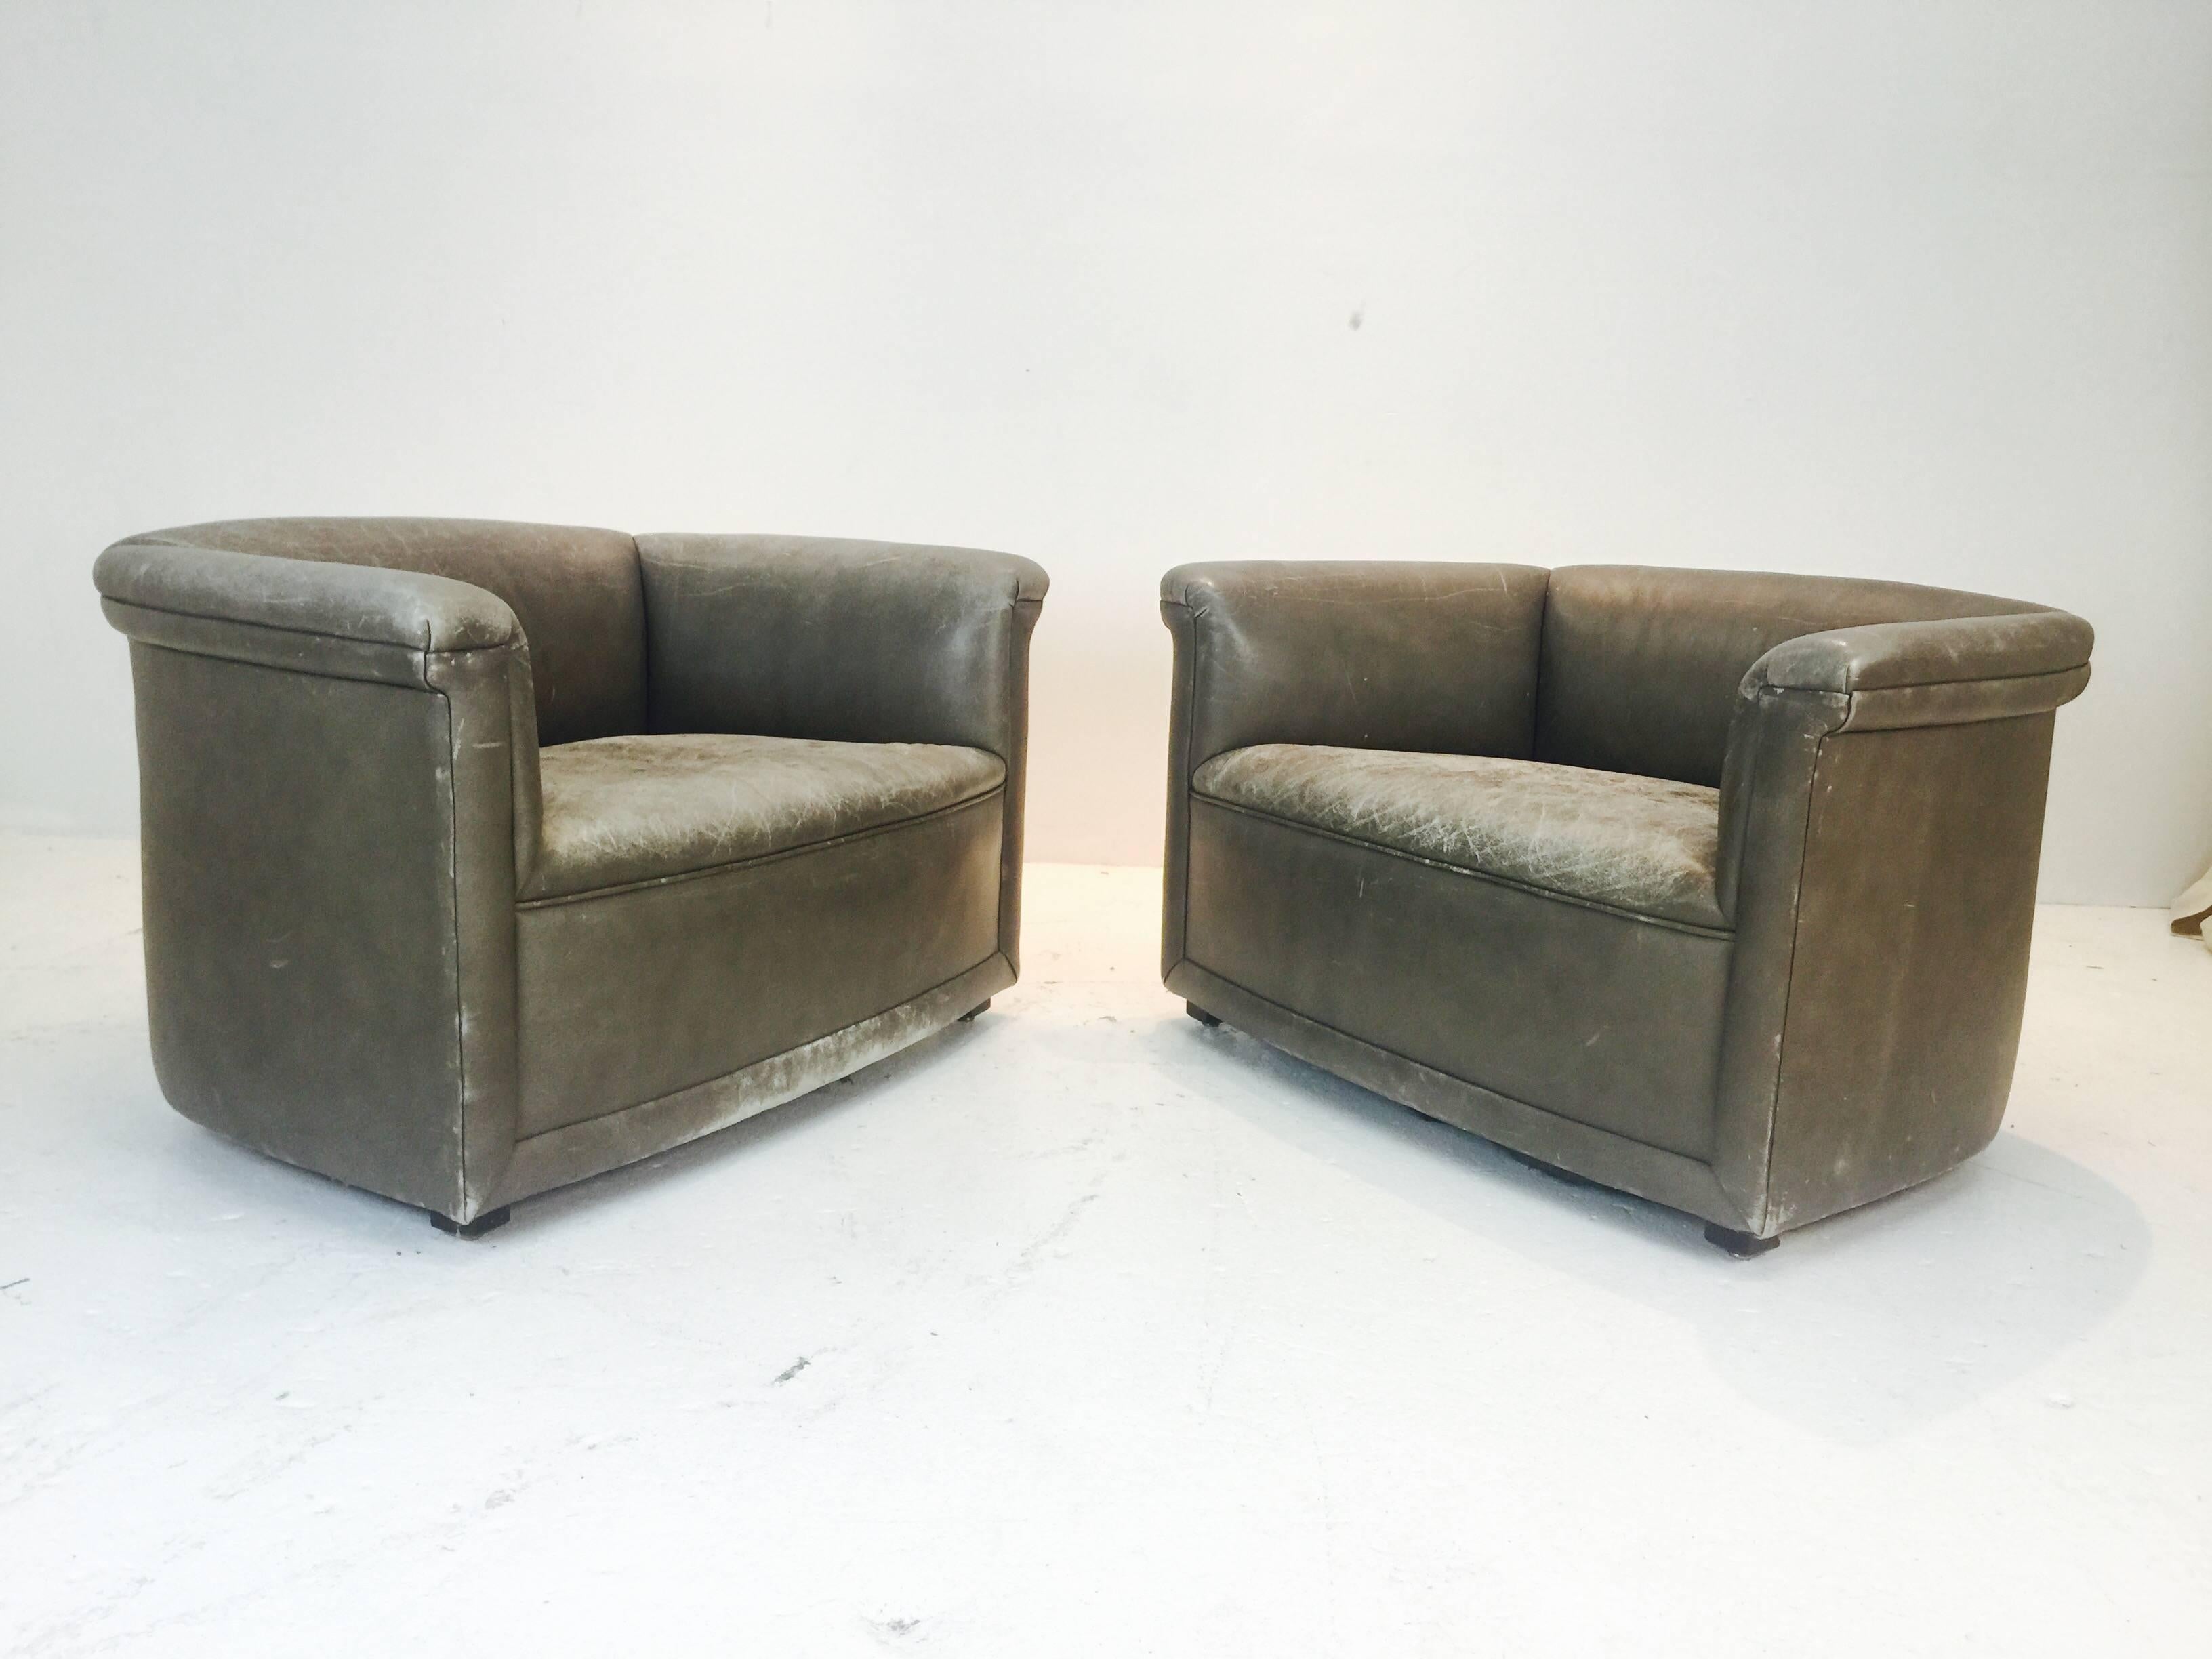 Pair Patina Leather Club Chairs by Ward Bennett. The chairs have a graceful form and needs reupholstery.

dimension:39